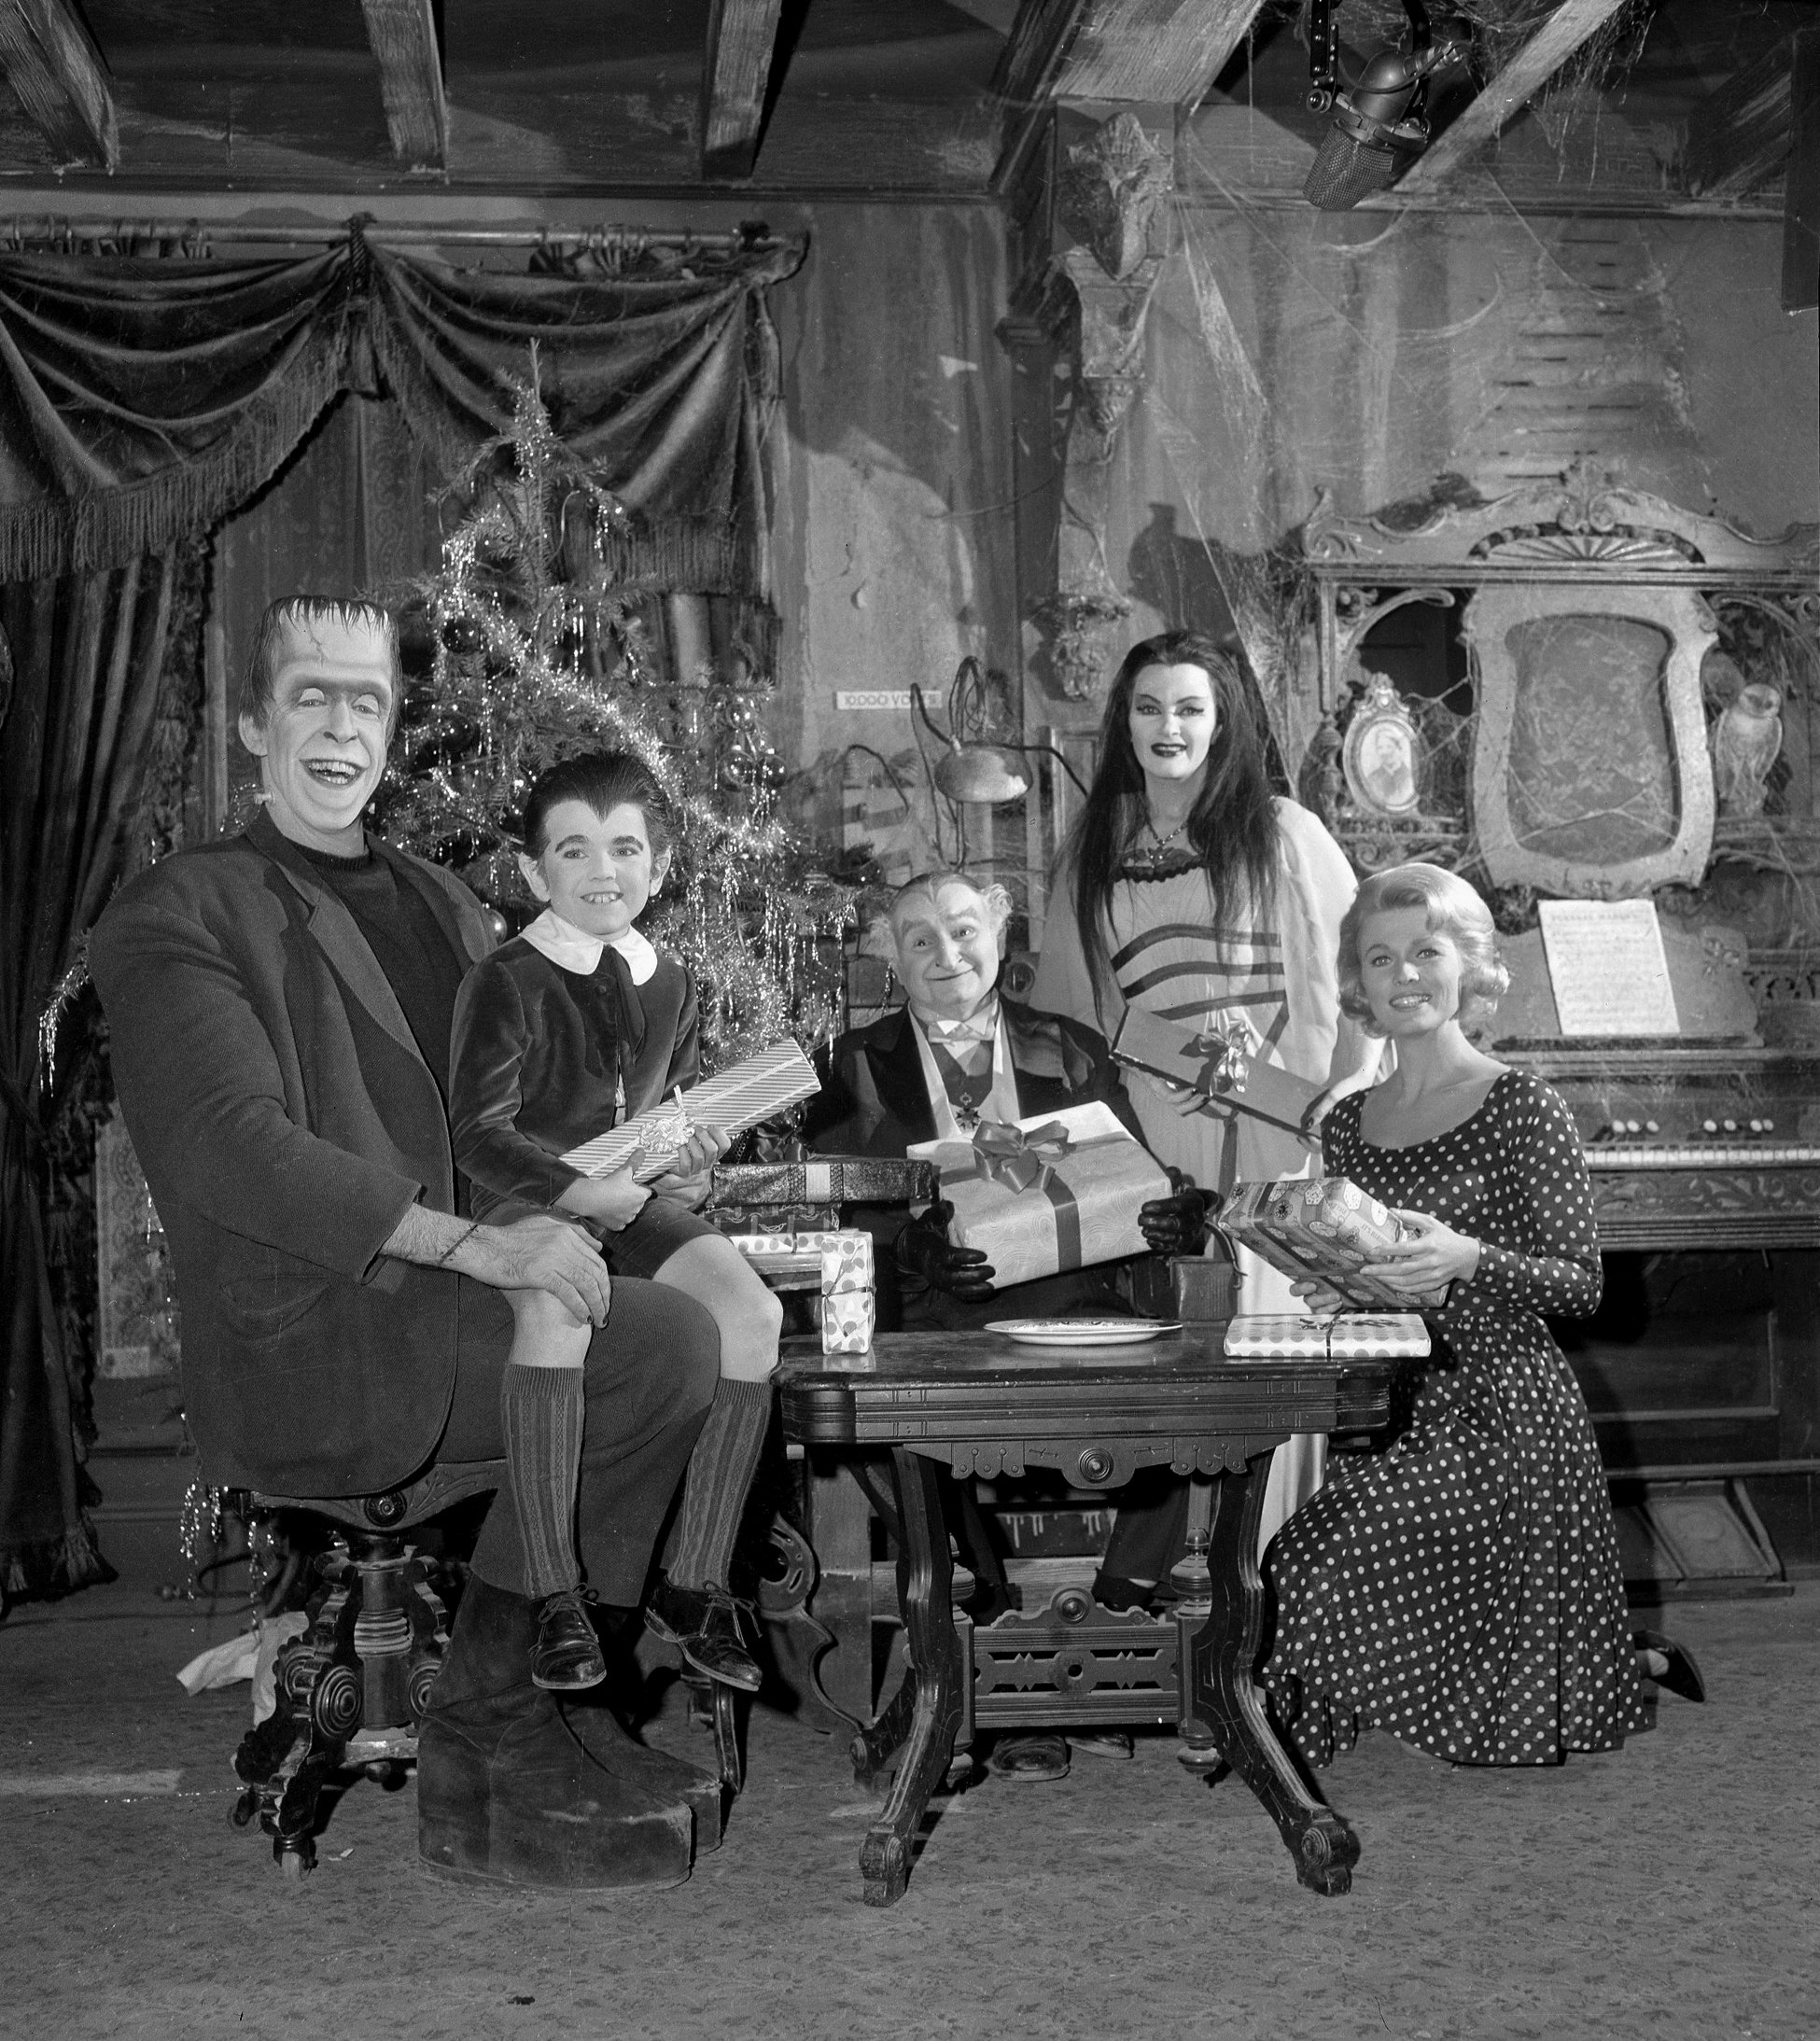 Fred Gwynne as Herman Munster, Butch Patrick as Eddie Munster, Al Lewis as Grandpa Munster, Yvonne DeCarlo as Lily Munster, and Pat Priest as Marilyn Munster in a cast photo of 'The Munsters', 1964